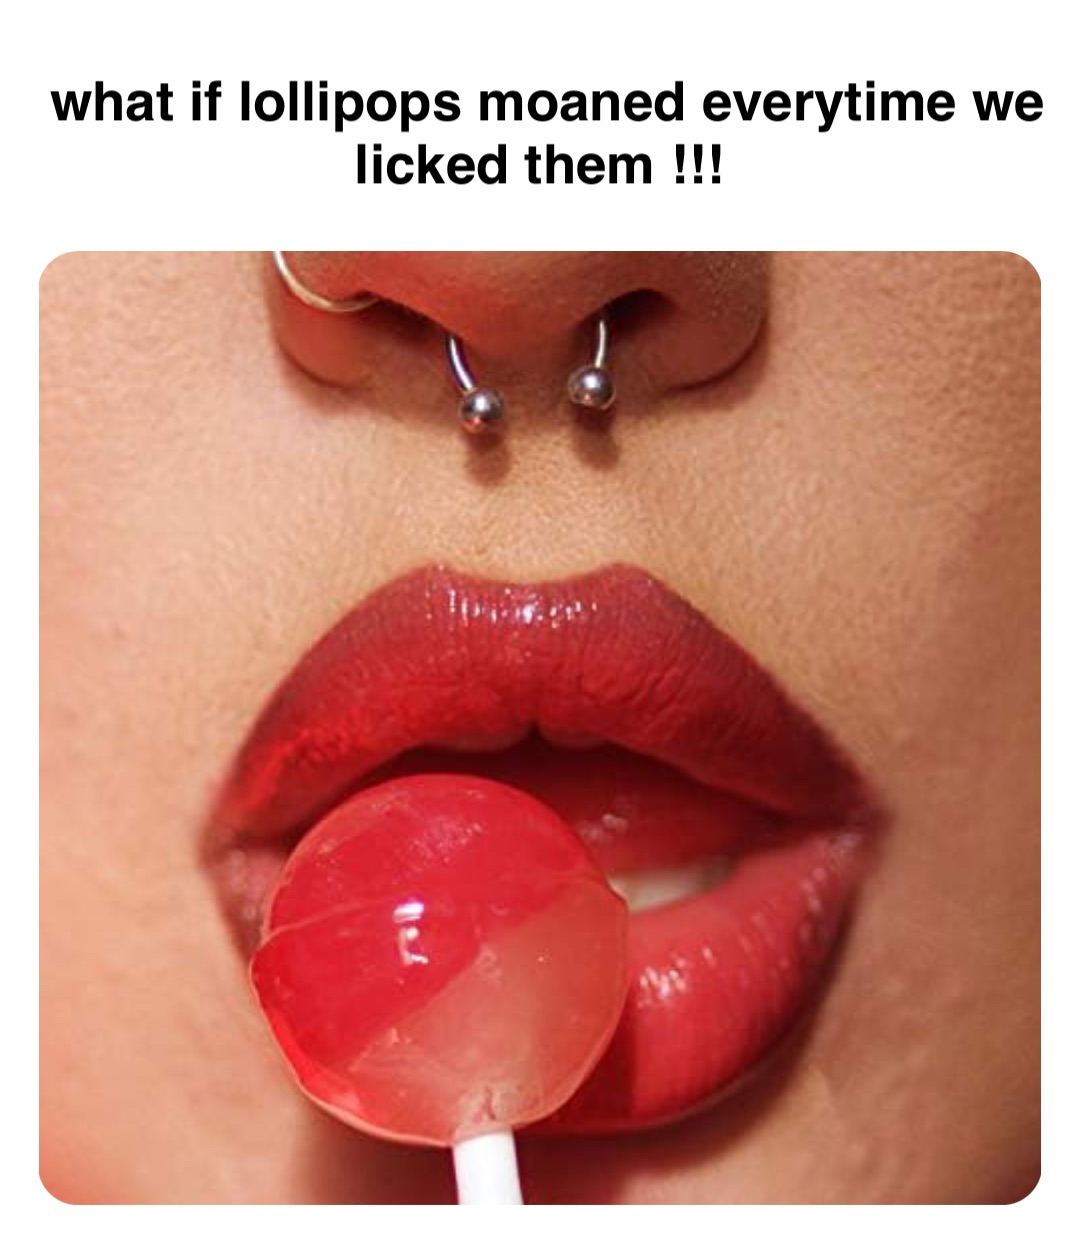 Double tap to edit what if lollipops moaned everytime we licked them !!!